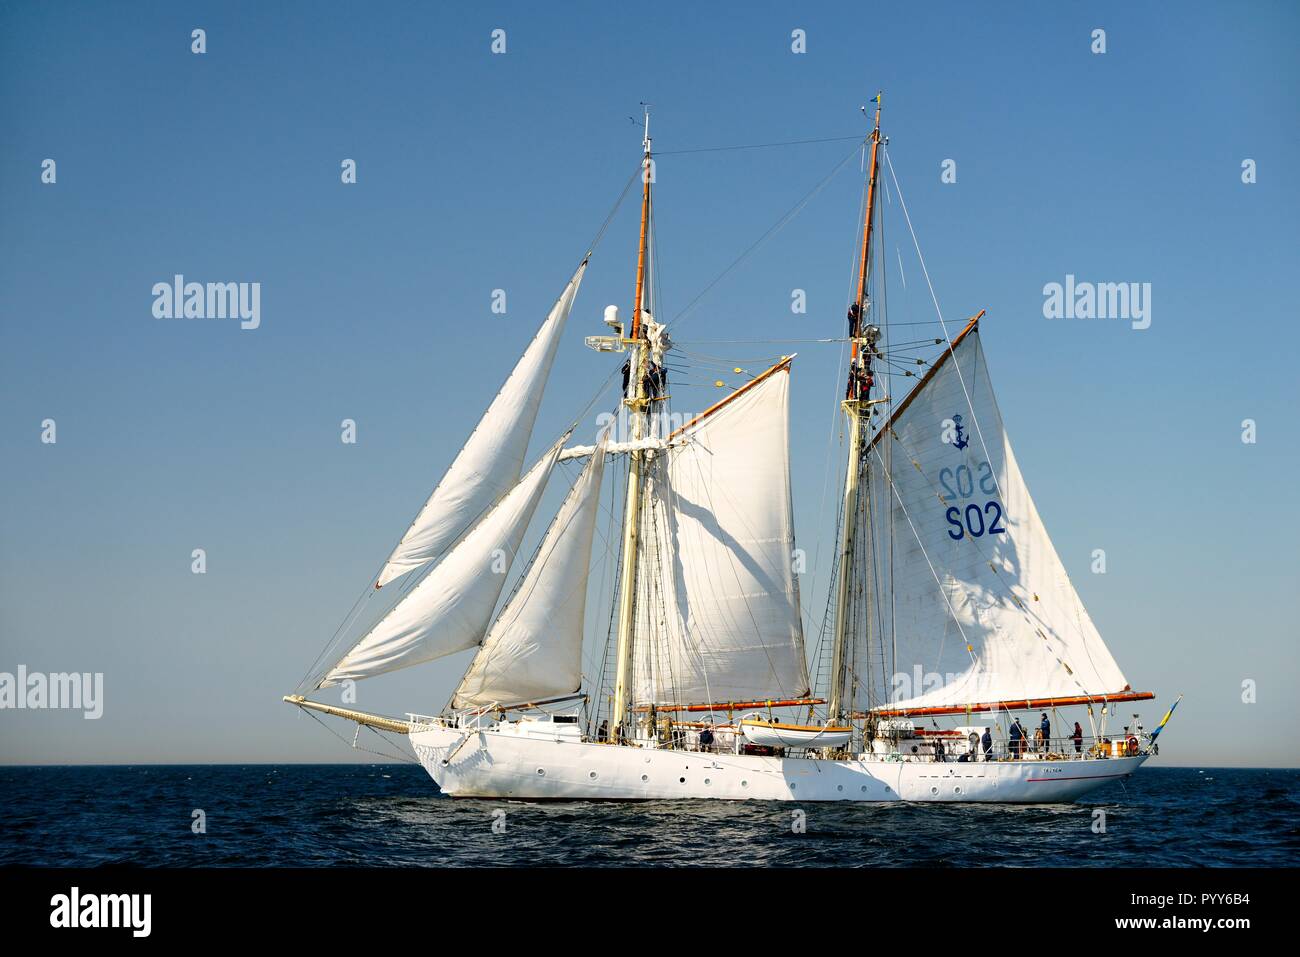 HSwMS Falken. Tall ship training schooner of the Swedish Navy under sail in the Baltic Sea. Crew aloft working sails during course tacking manoeuvre Stock Photo